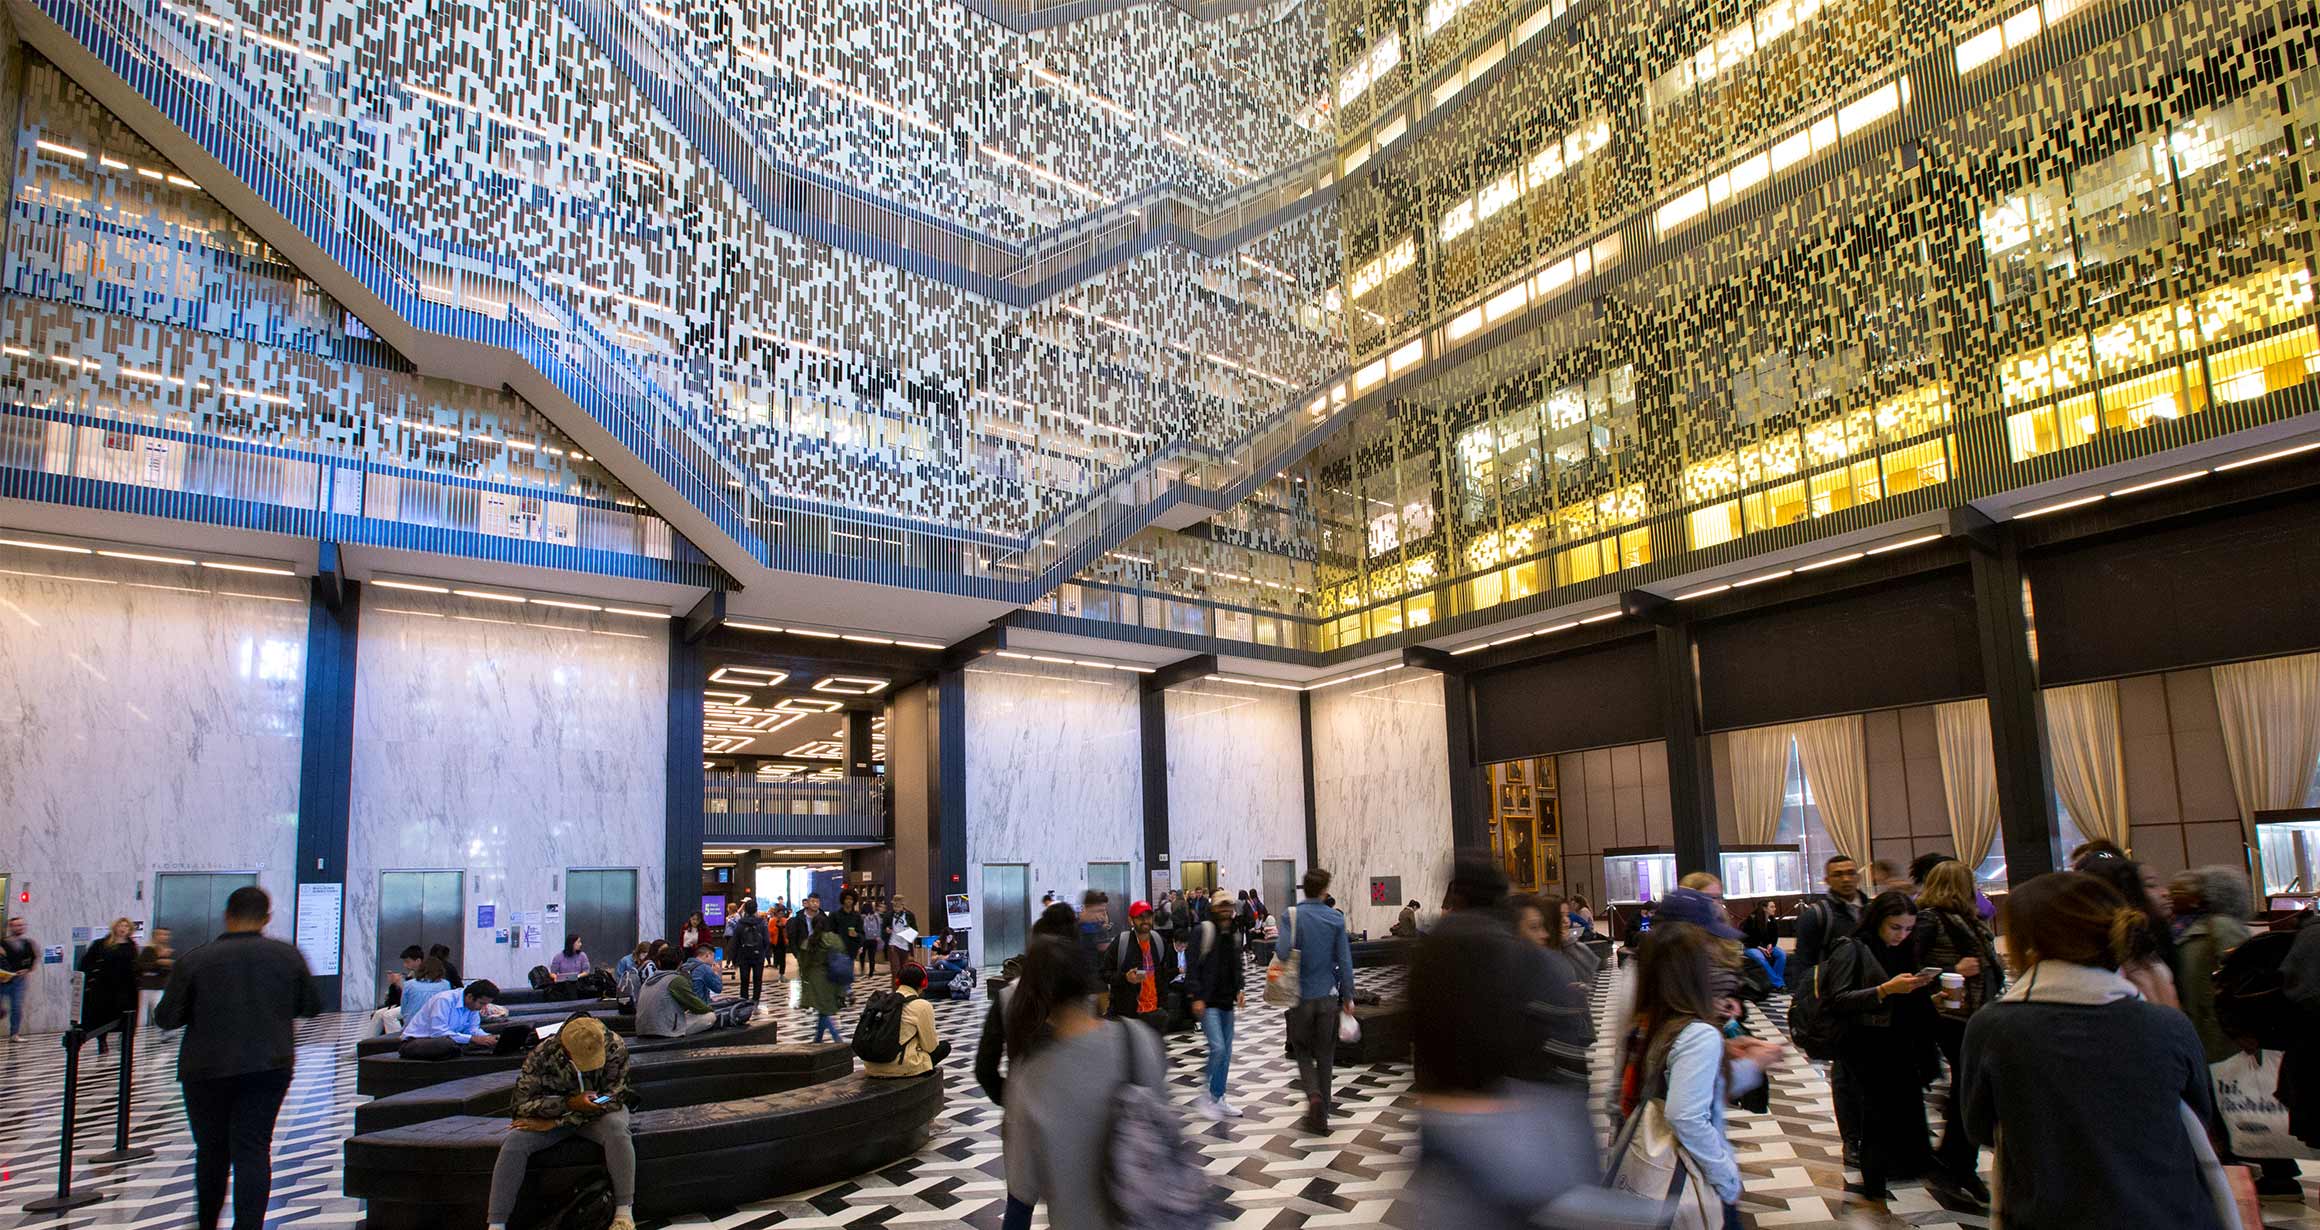 The main lobby of the bobst library and many students can be seen moving about.